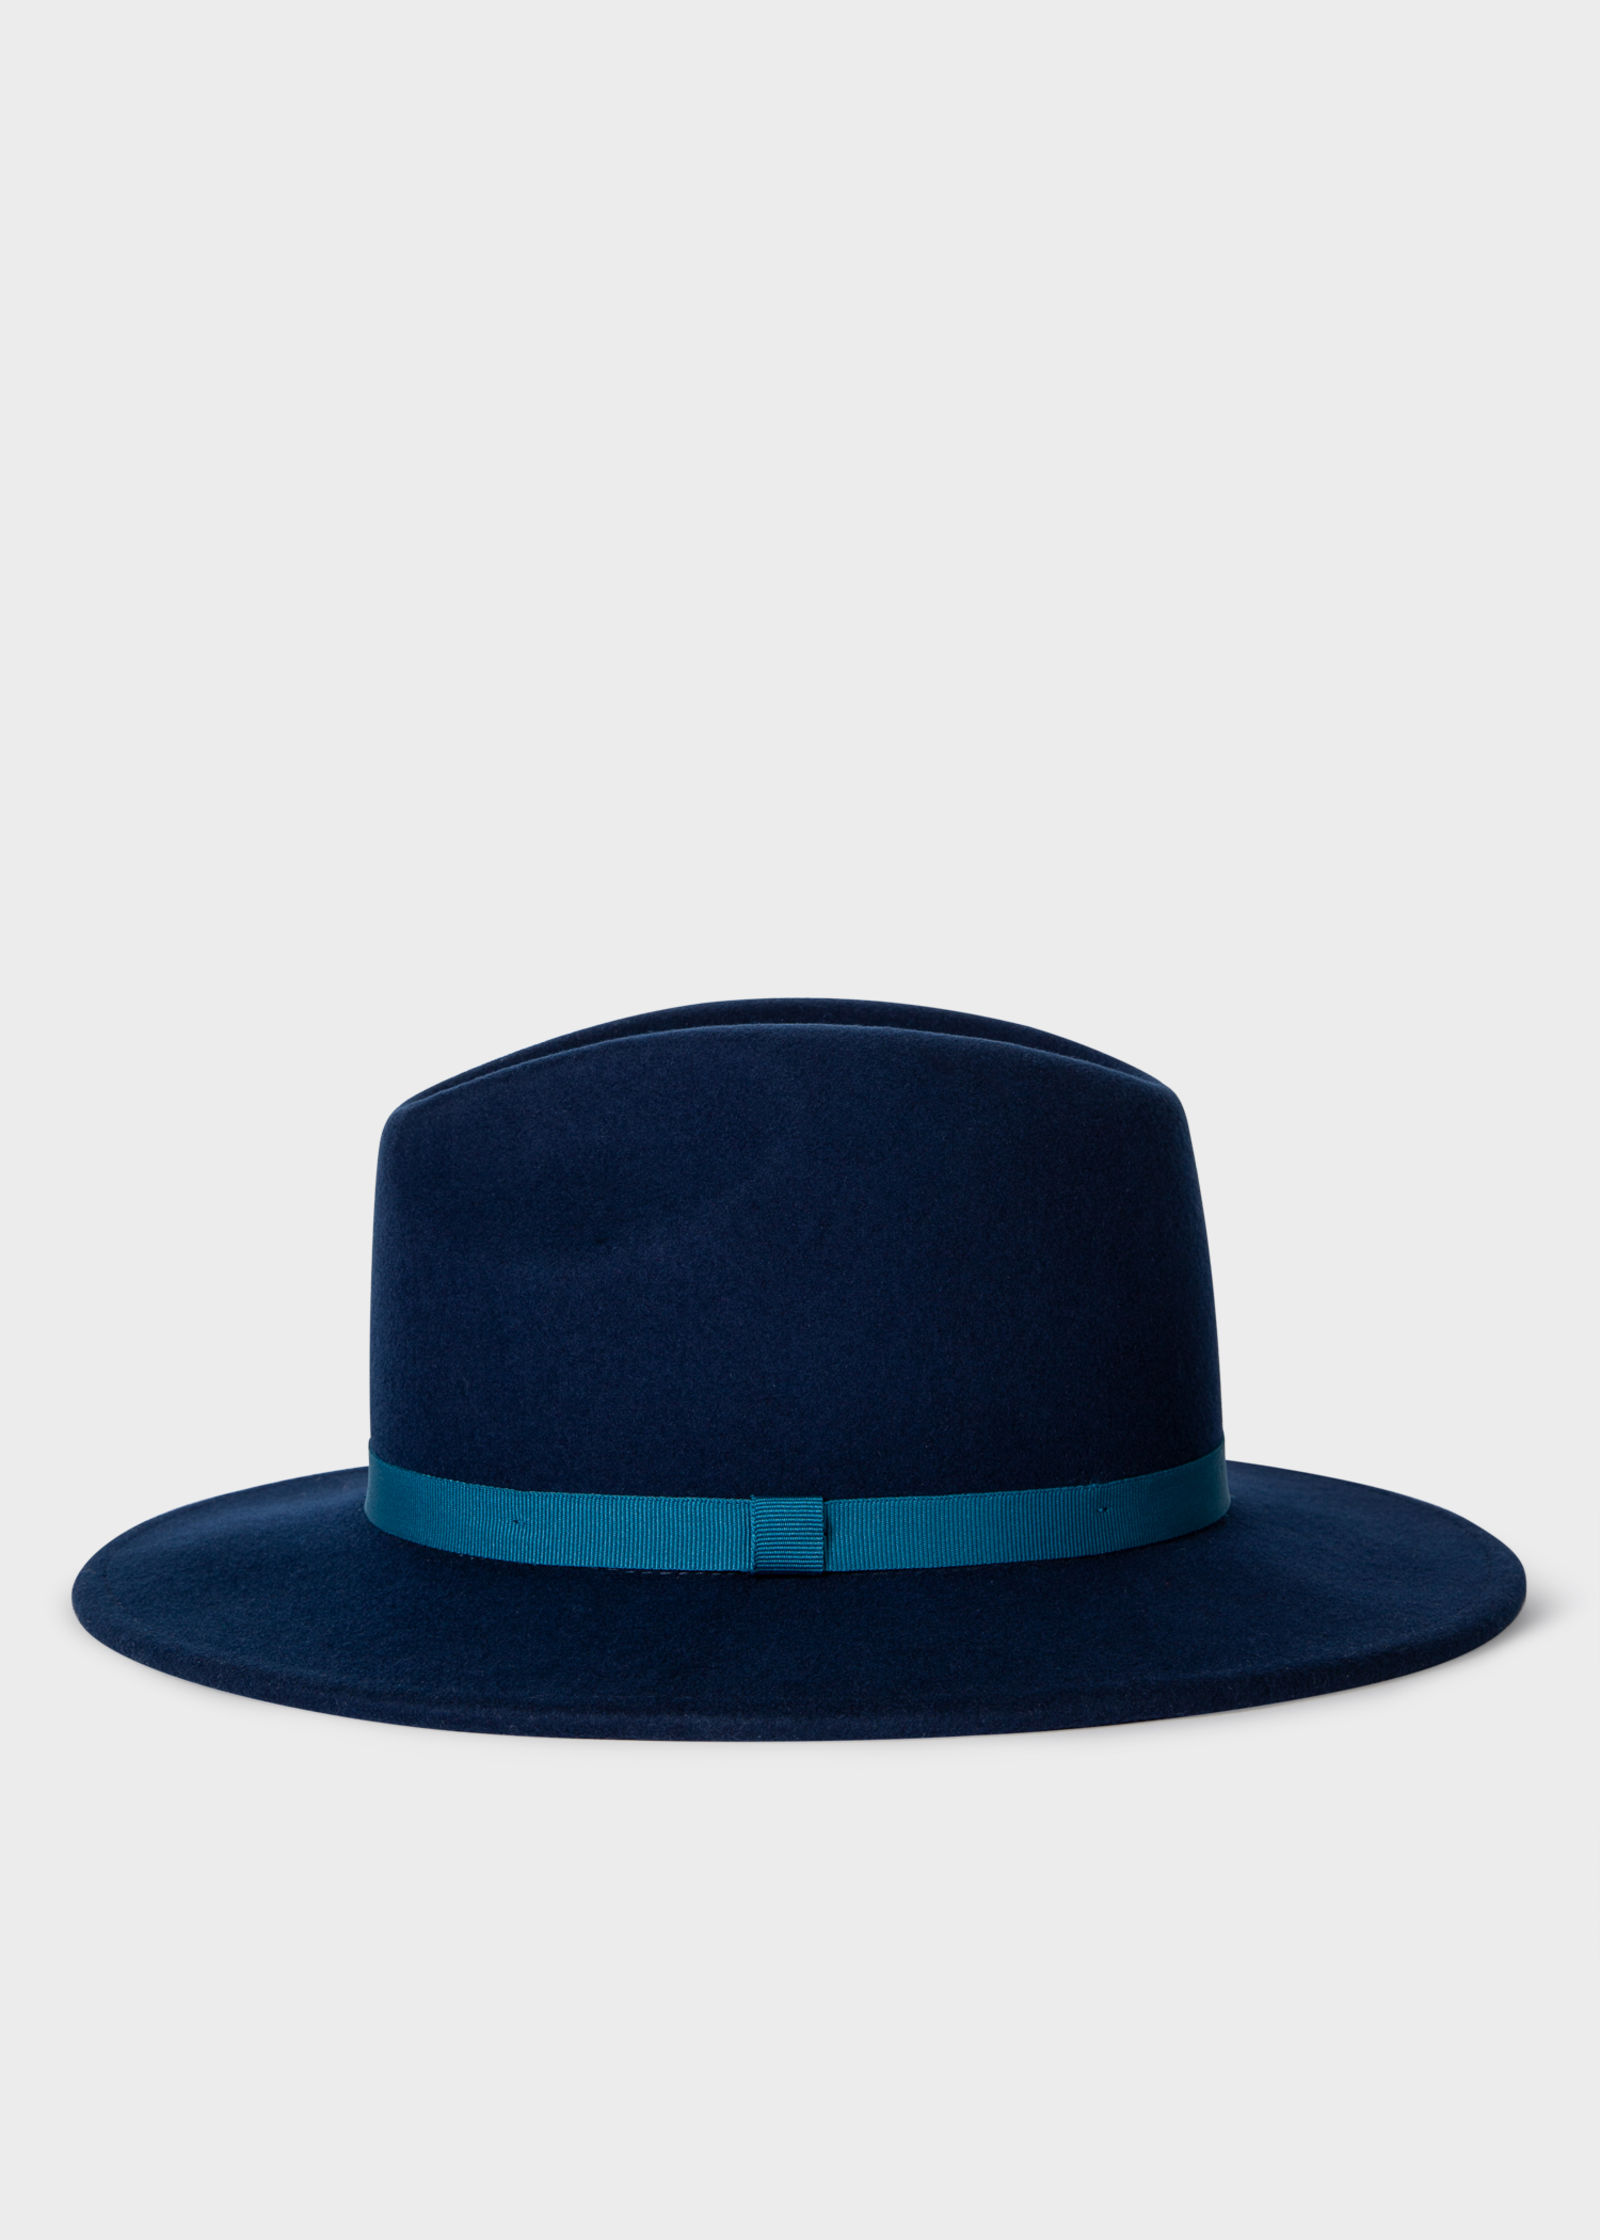 Paul Smith Navy Fedora Hat with Cobalt Blue Band
